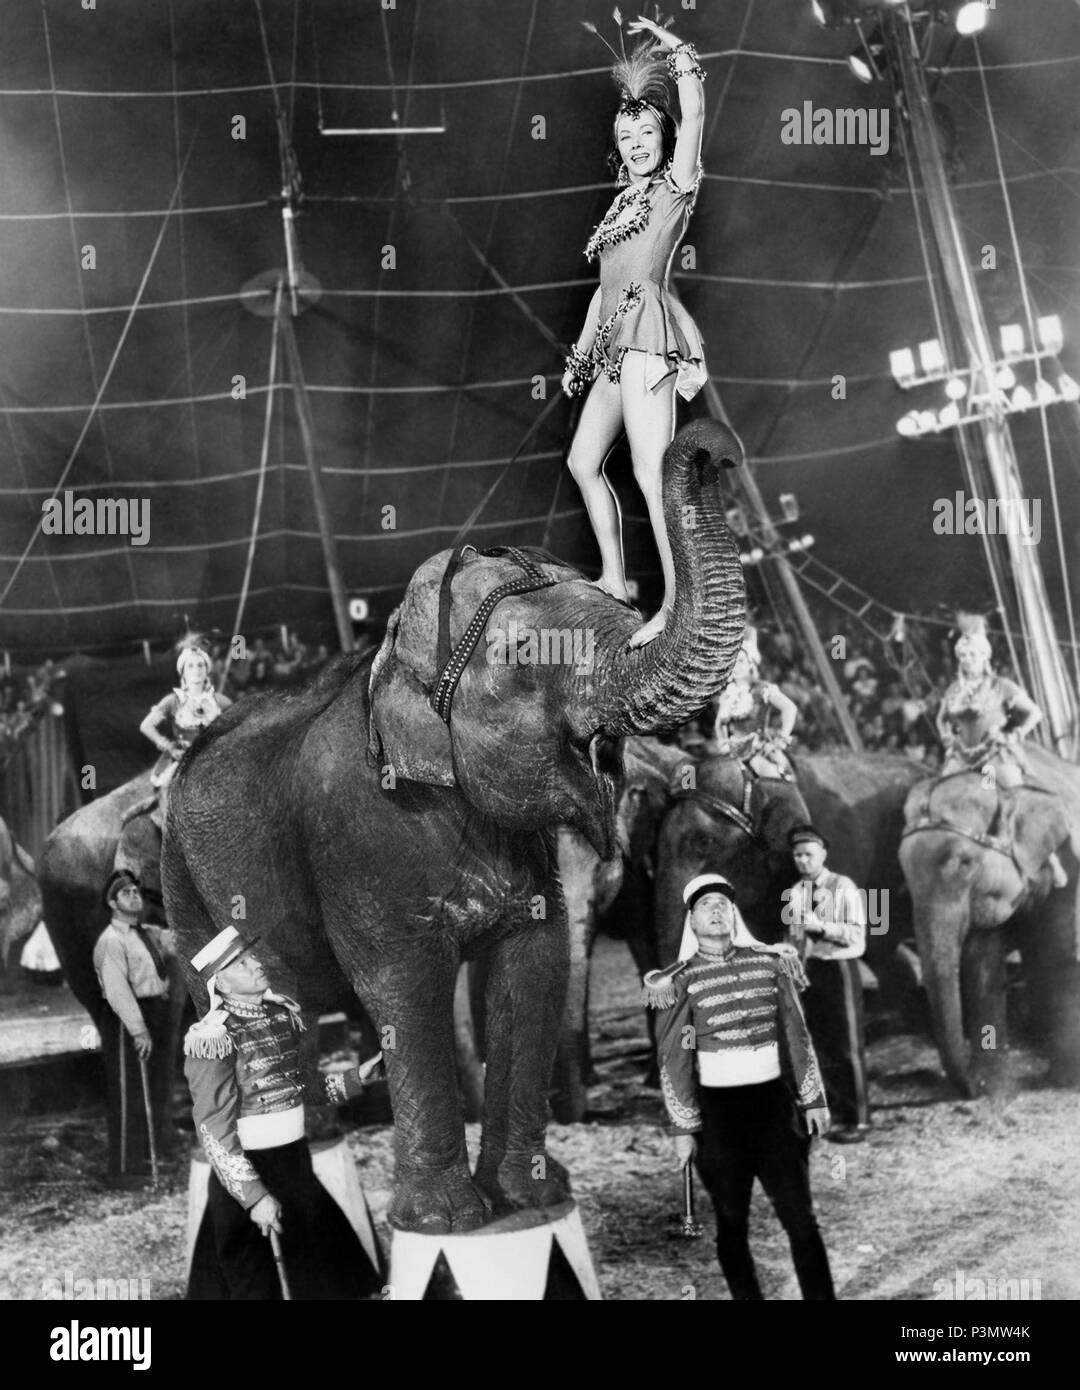 Original Film Title: THE GREATEST SHOW ON EARTH.  English Title: THE GREATEST SHOW ON EARTH.  Film Director: CECIL B DEMILLE.  Year: 1952.  Stars: GLORIA GRAHAME. Credit: PARAMOUNT PICTURES / Album Stock Photo